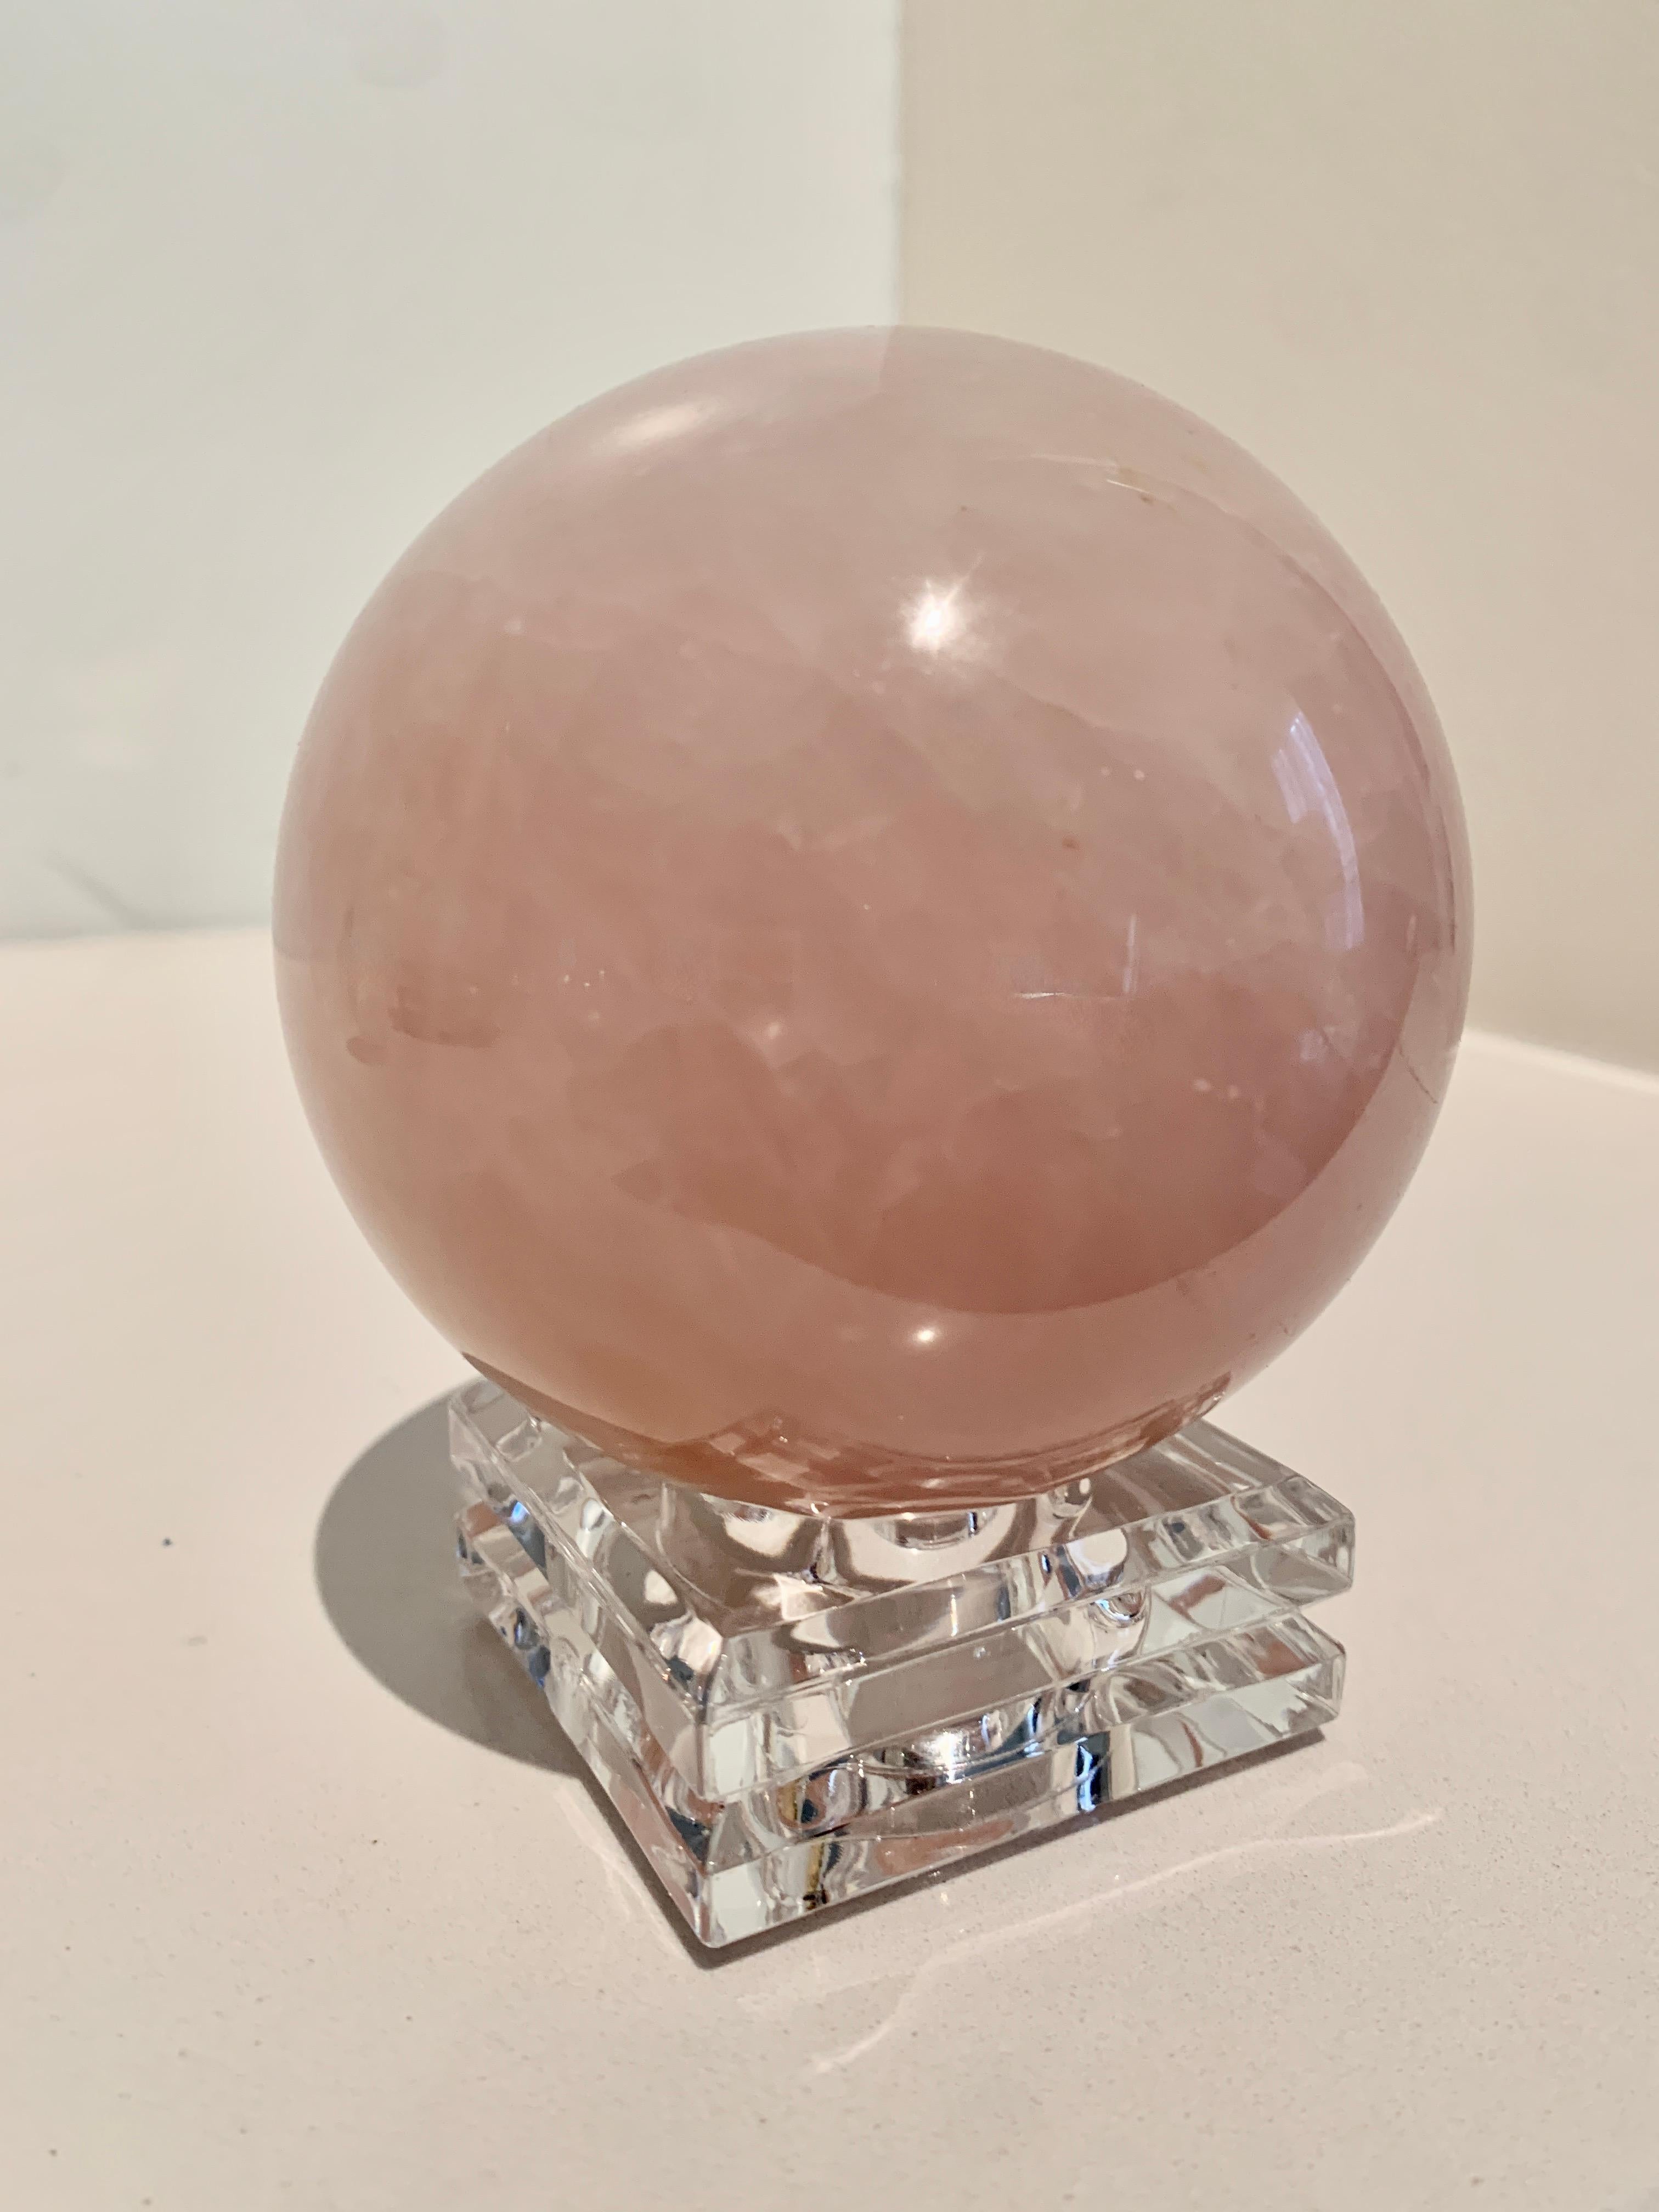 A wonderfully Blush pink crystal ball, on a stand an acrylic cut stand. The stand looks to be crystal and both have a brilliant aura and energy... a compliment to any desk as an Object of art of paper weight. A great gift.